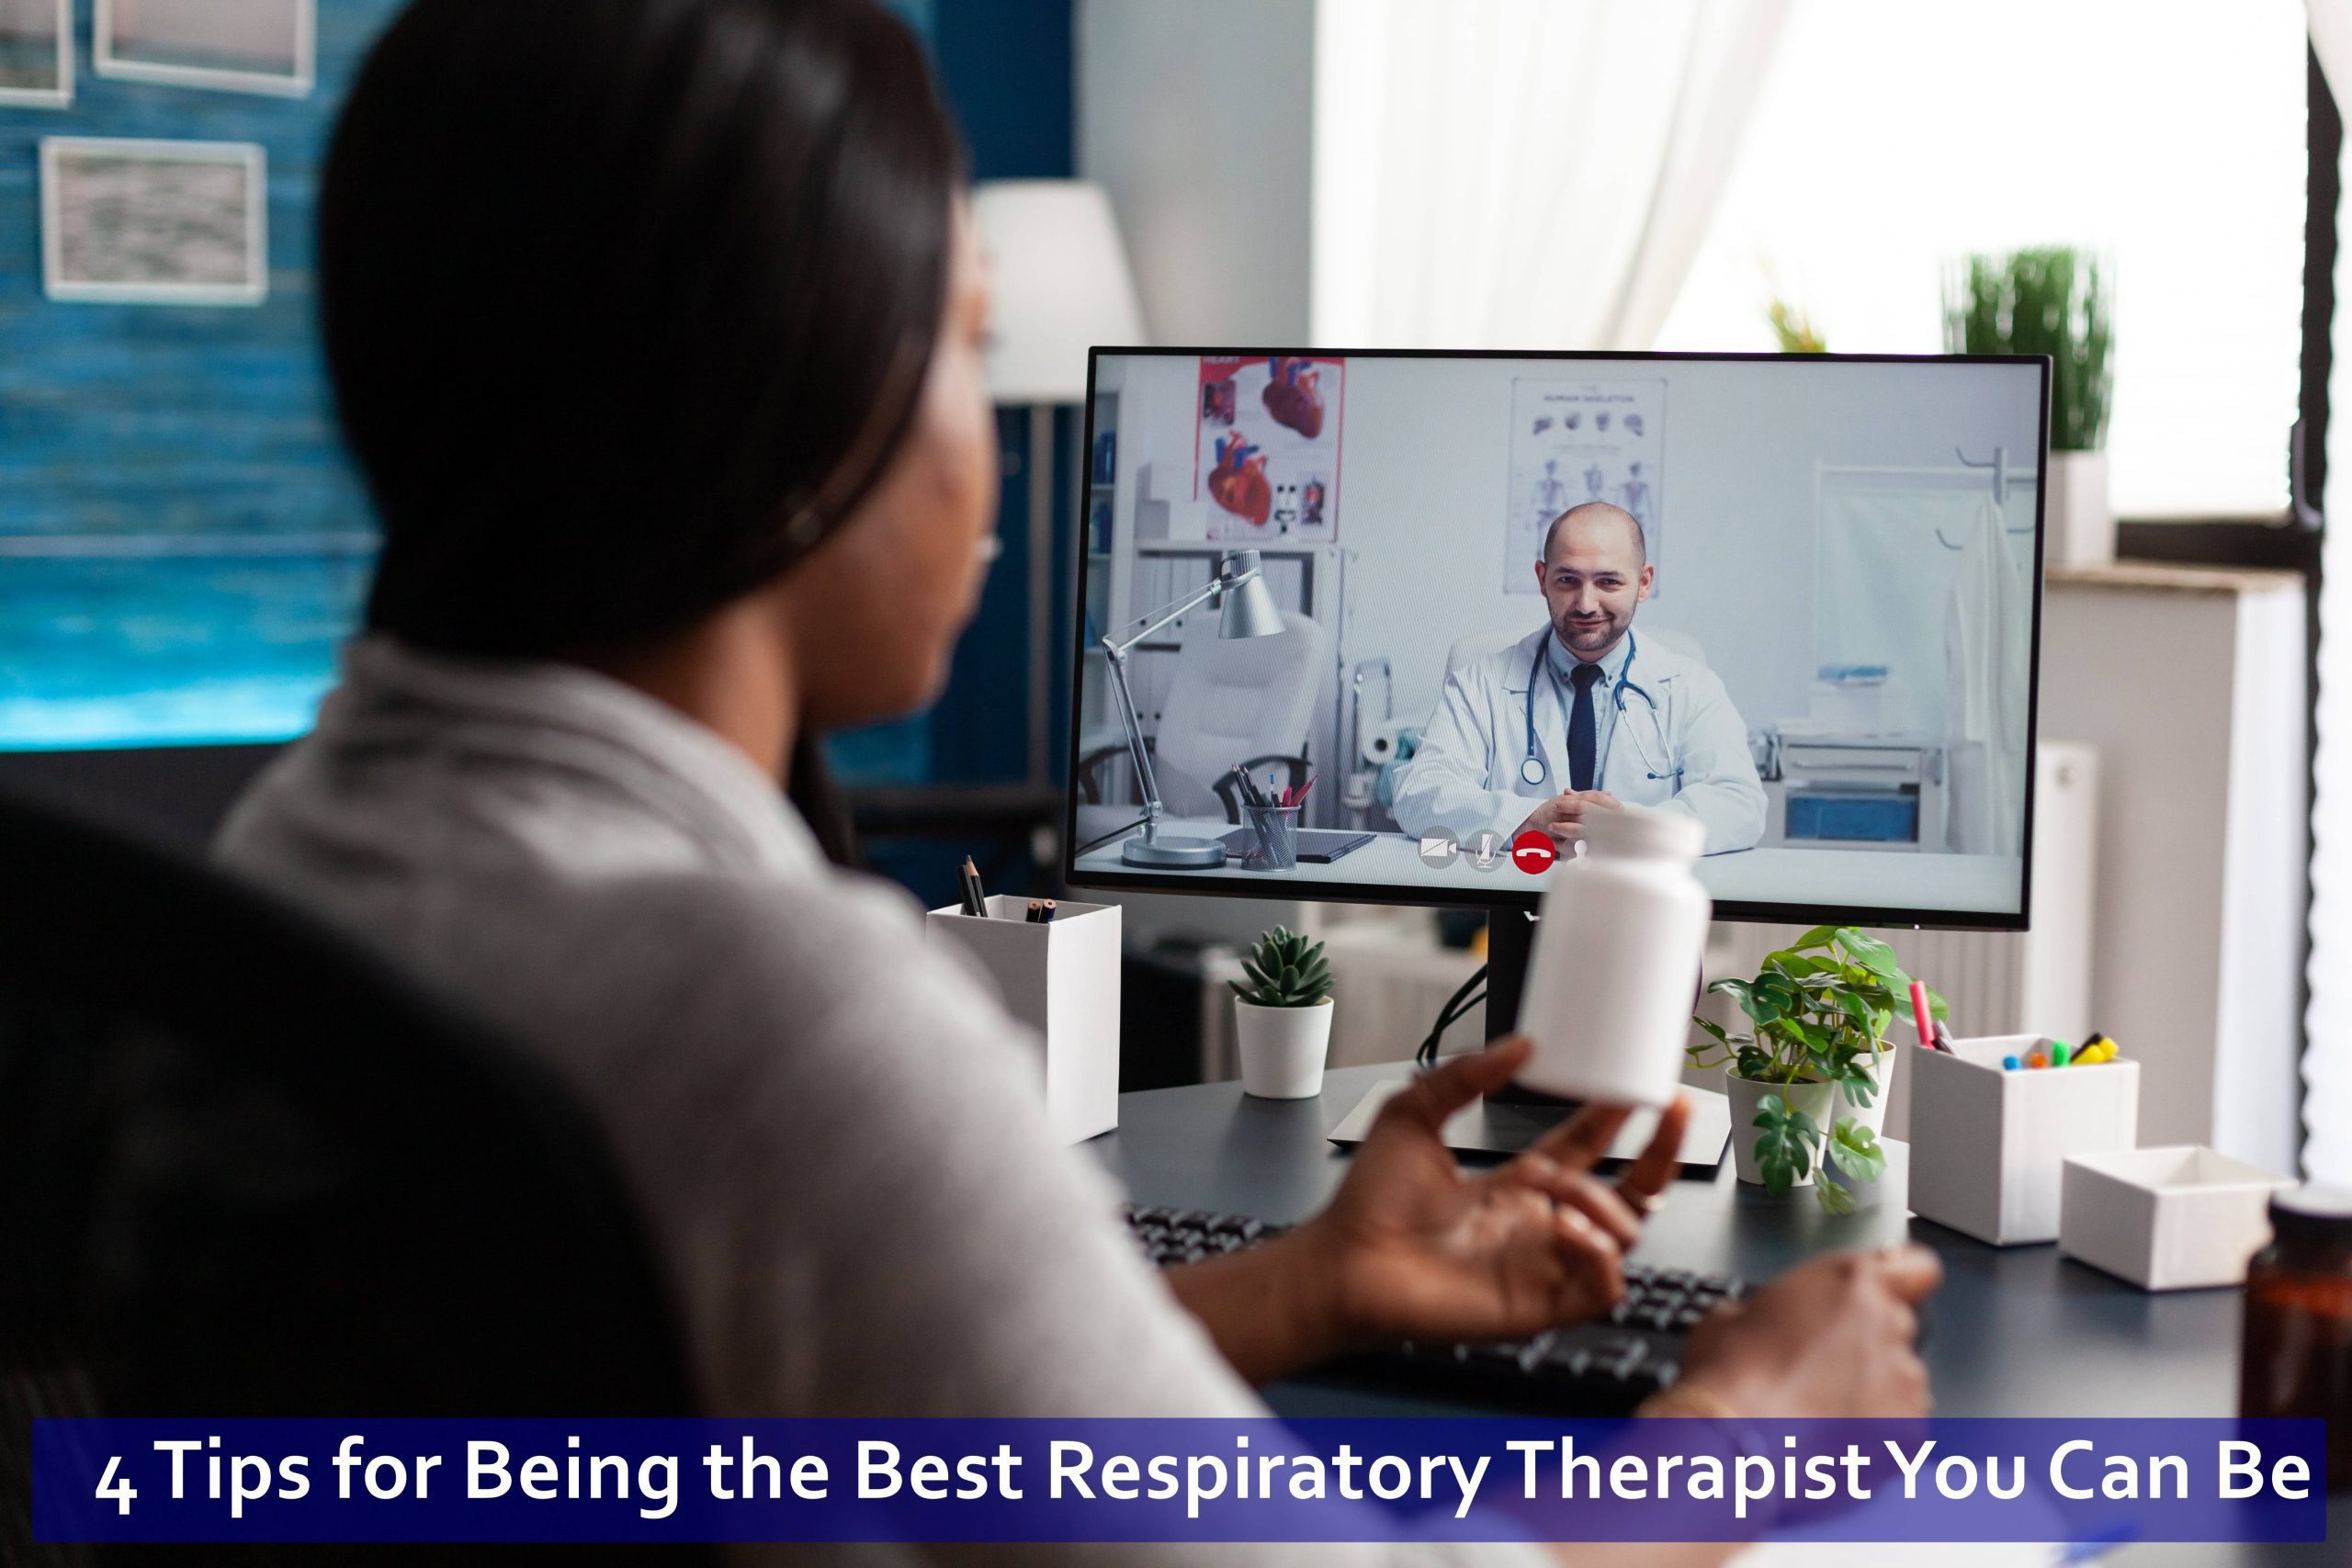 4 Tips for Being the Best Respiratory Therapist You Can Be